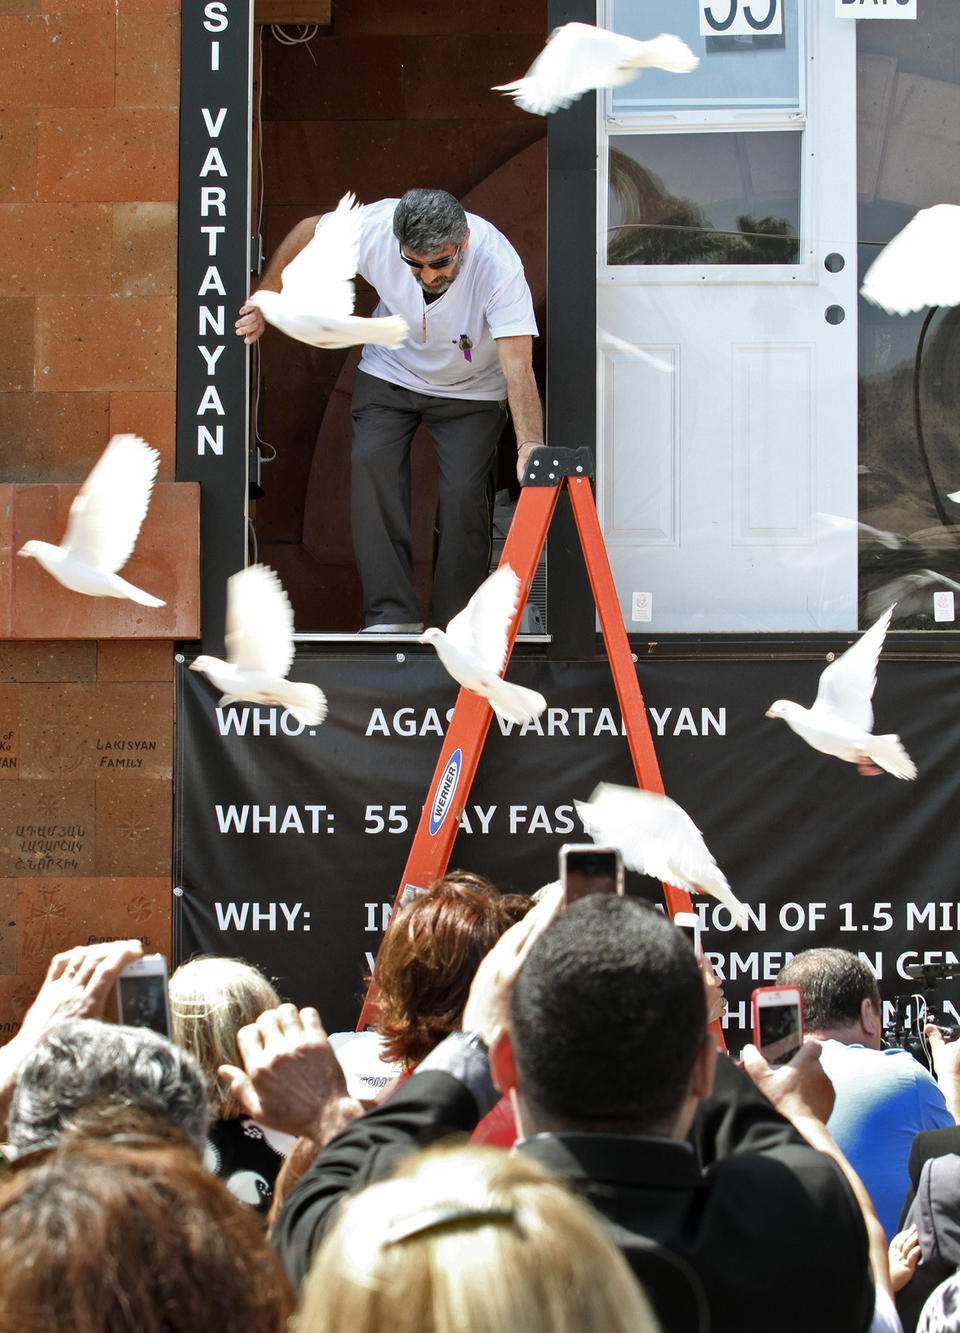 <p>Agasi Vartanyan emerges from a glass enclosure at St. Leon Cathedral in Burbank on Thursday, May 28, 2015, where he fasted for 55 days to commemorate the 100th anniversary of the Armenian Genocide.</p>